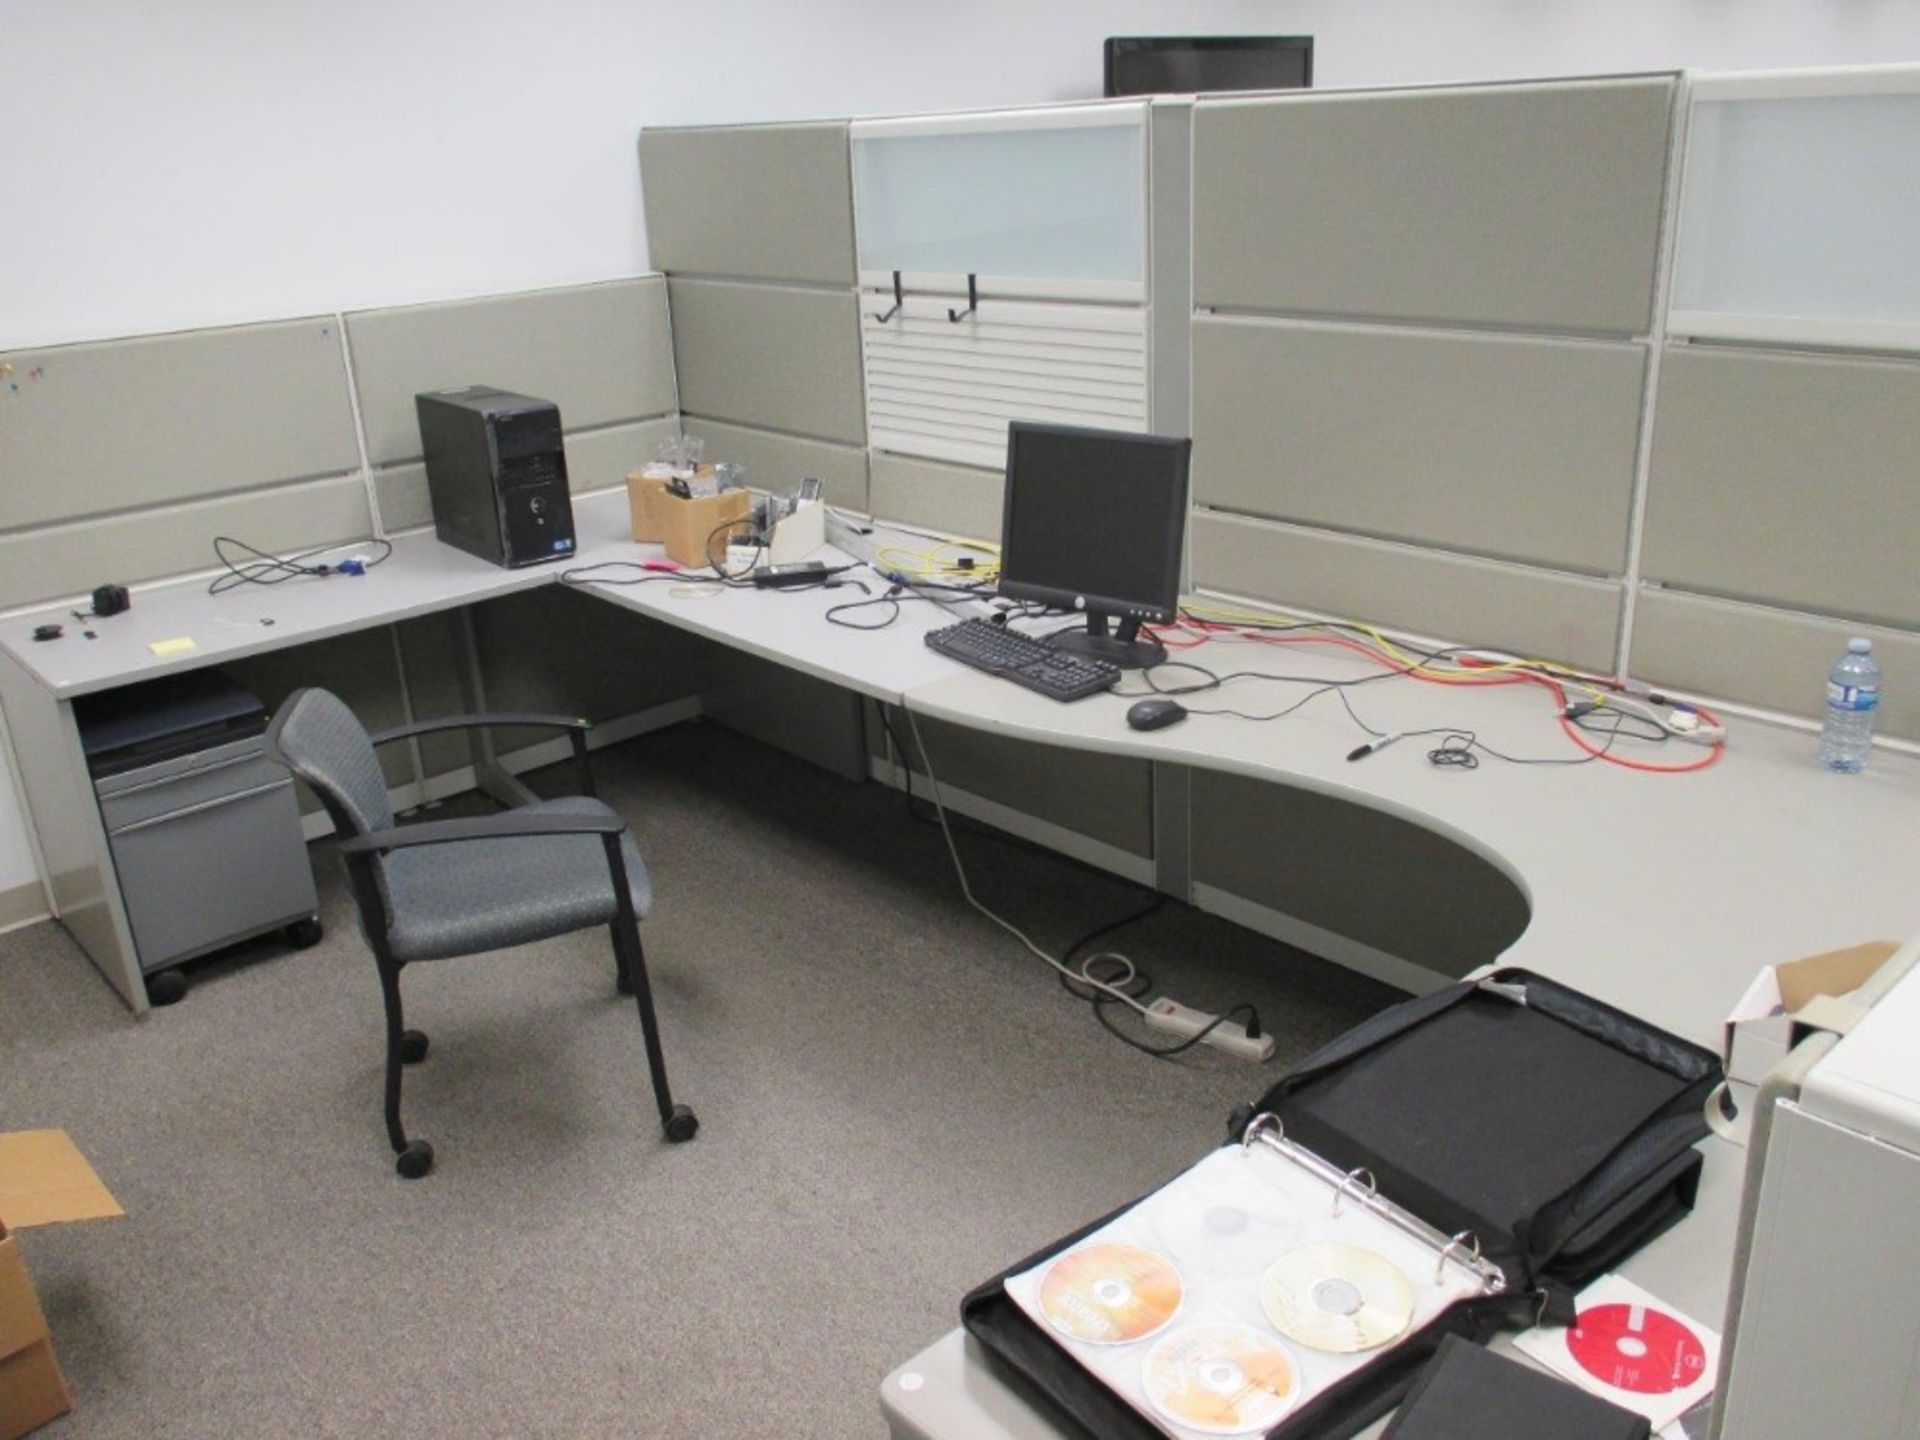 2008 Tecknion 8 Station Work Cubicle System - Image 5 of 6